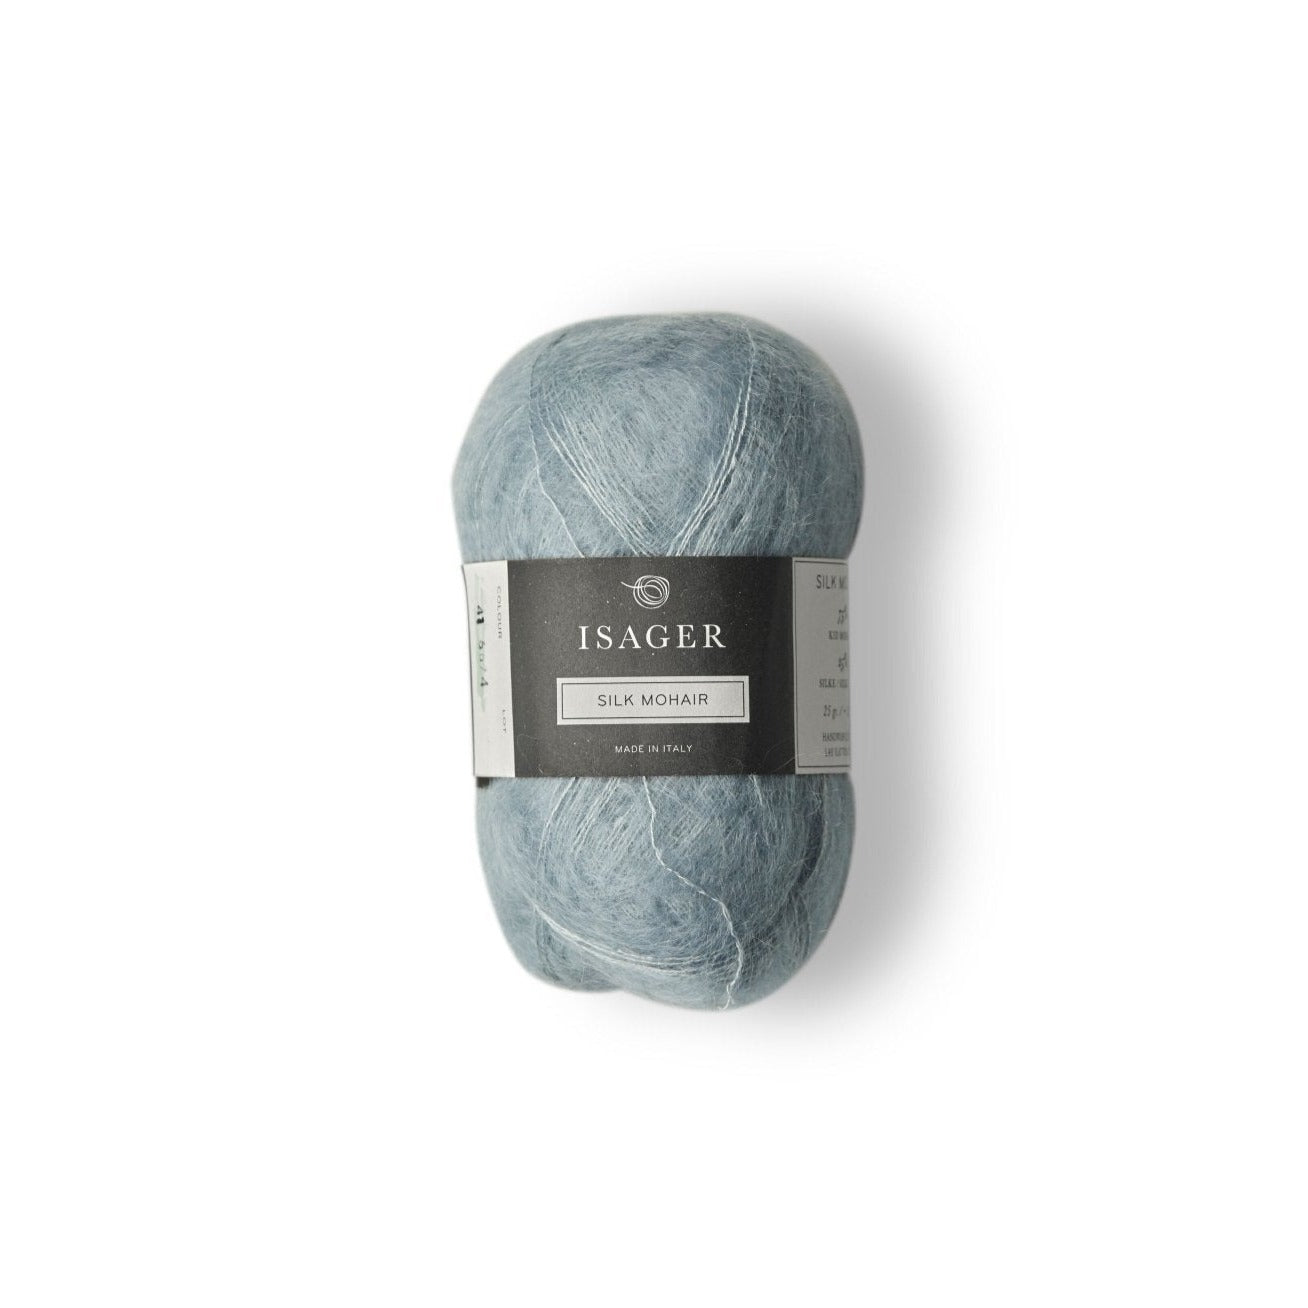 Isager Silk Mohair - 41 - 2 Ply - Isager - The Little Yarn Store